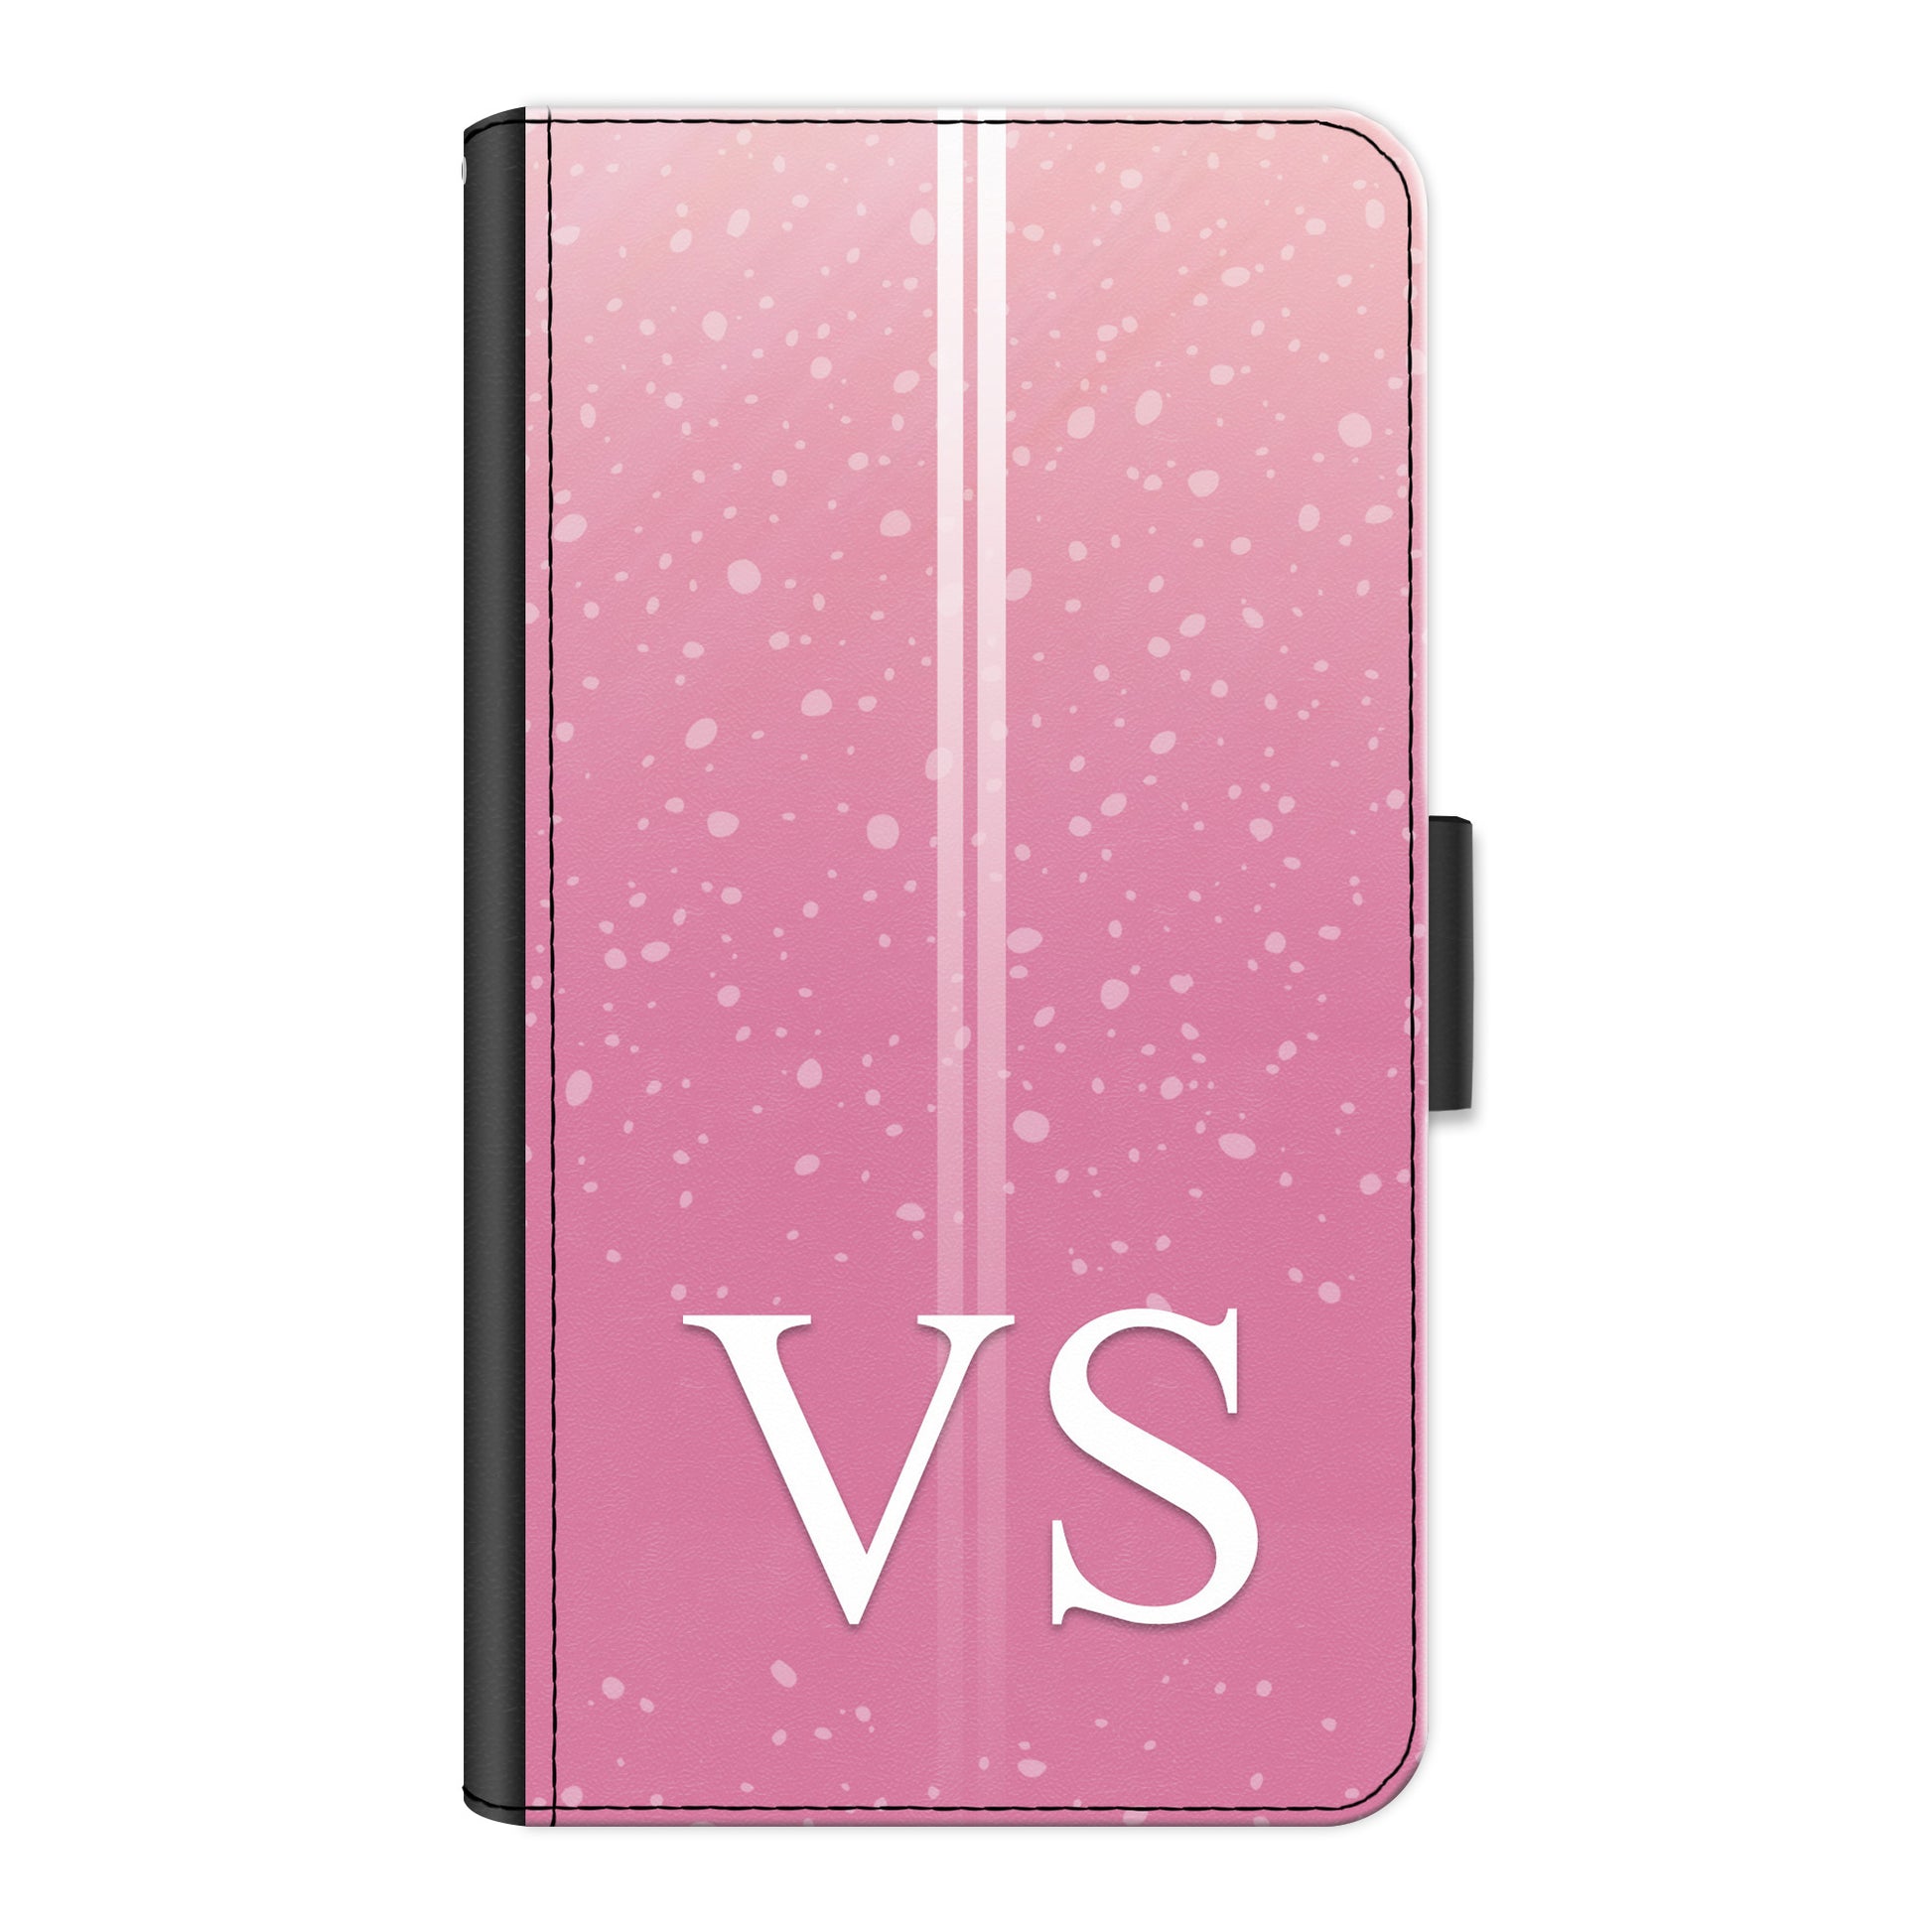 Personalised Motorola Phone Leather Wallet with White Initials, Pin Stripes and Droplets on Pink